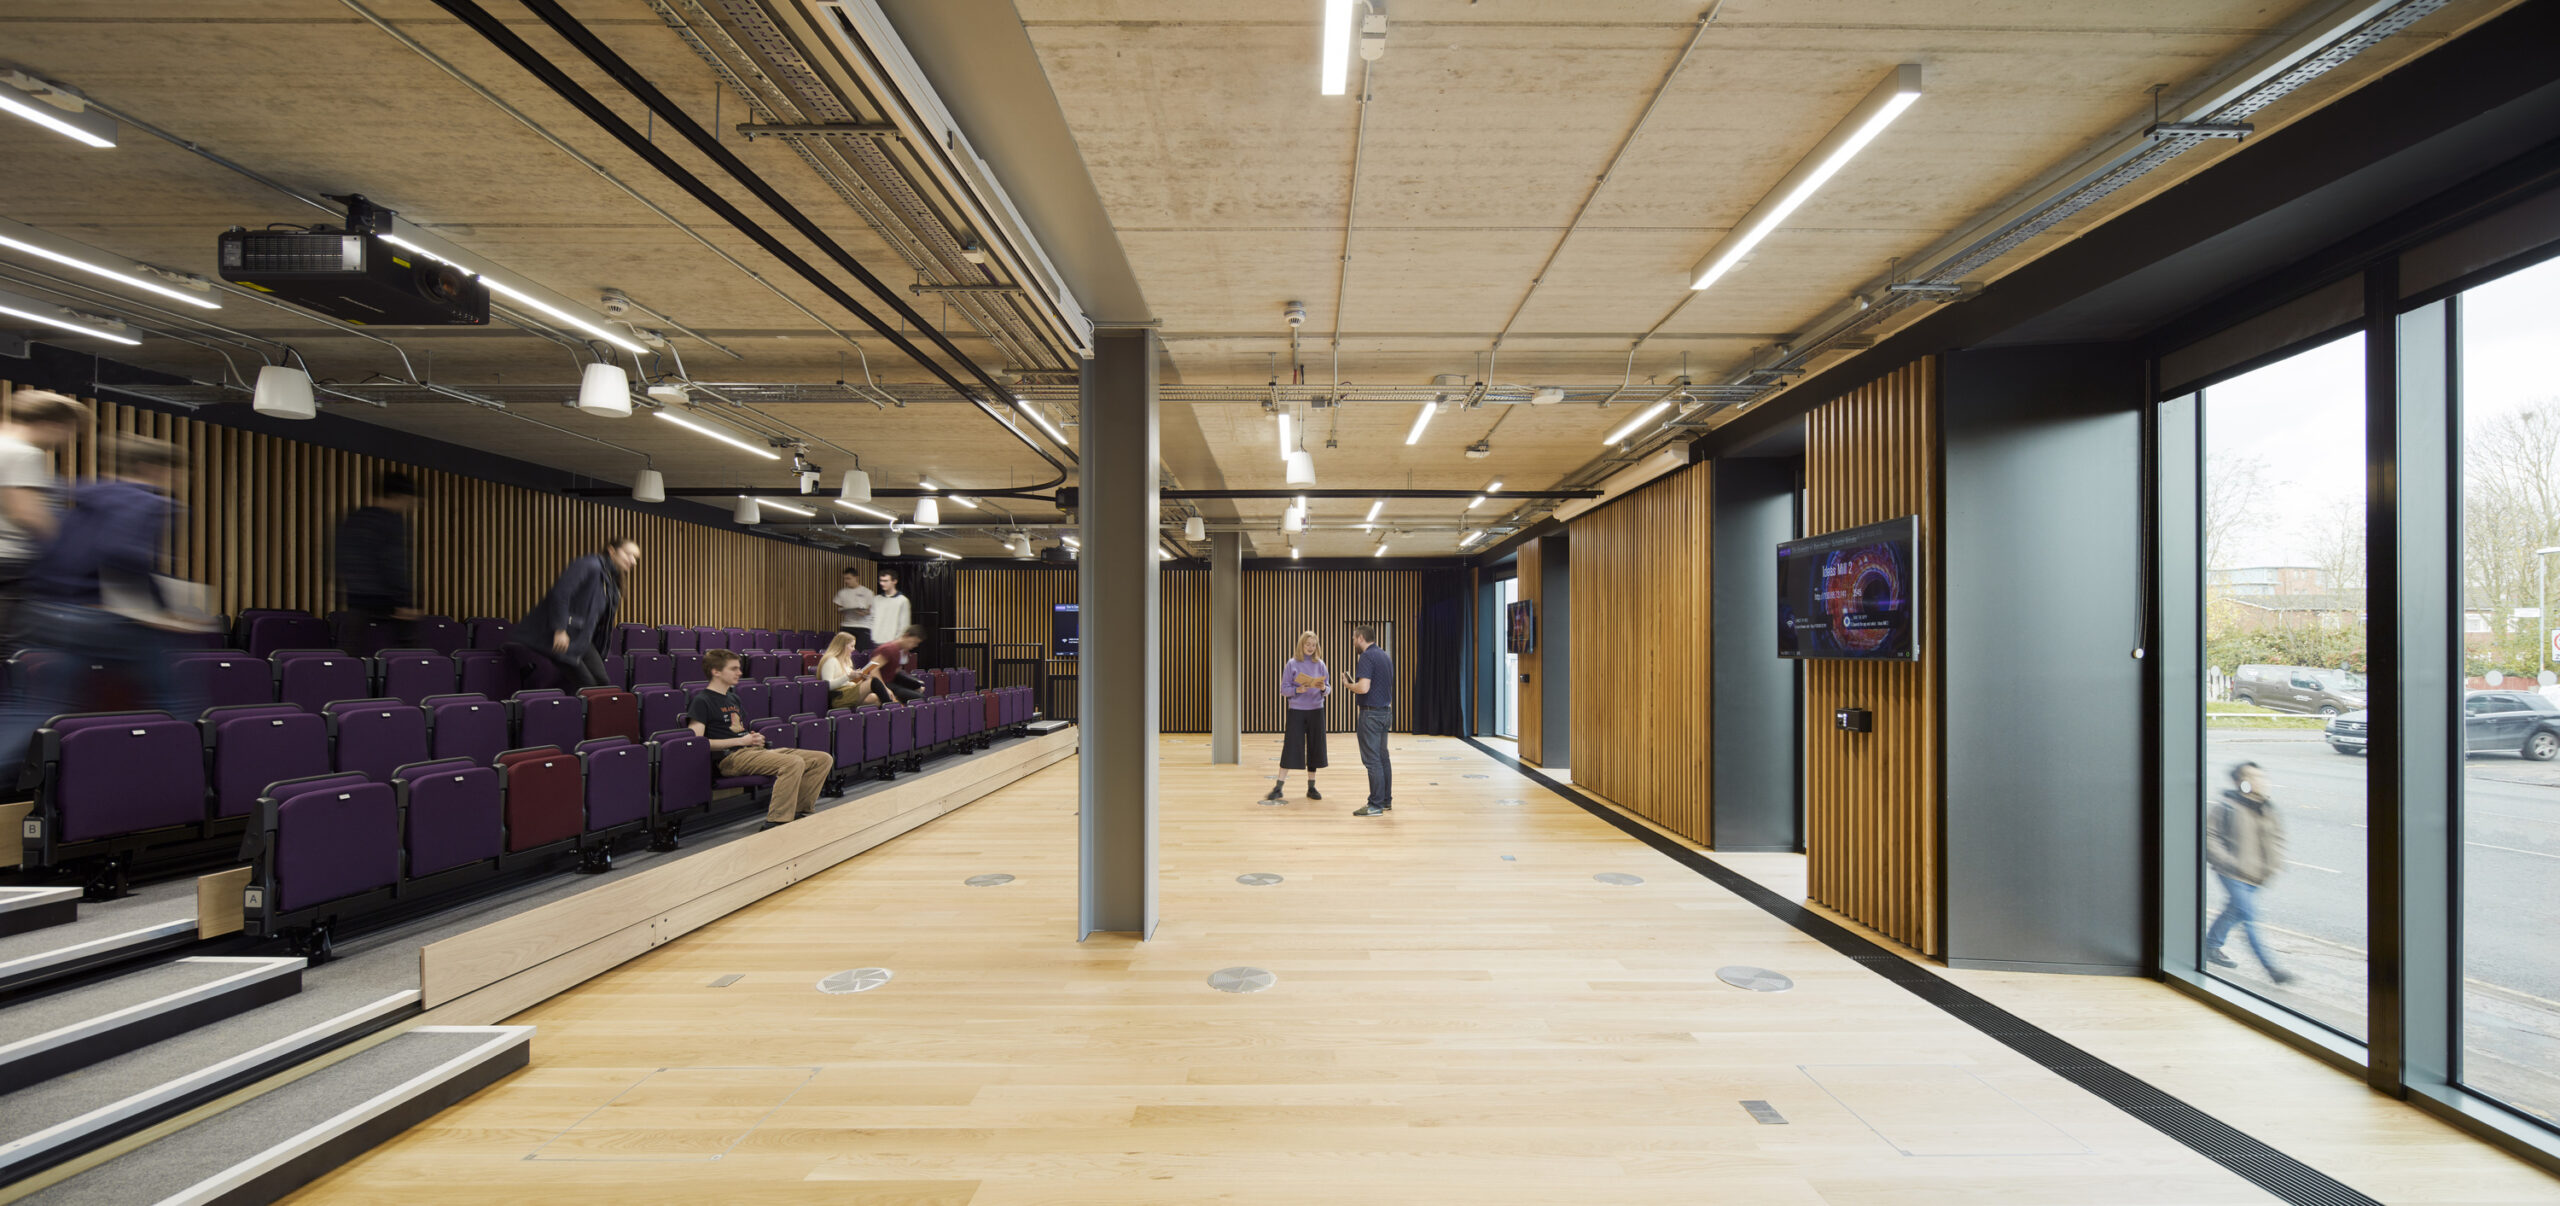 Hawkins Brown-University of Manchester Schuster Annexe-Ideas Mill teaching spaceMill